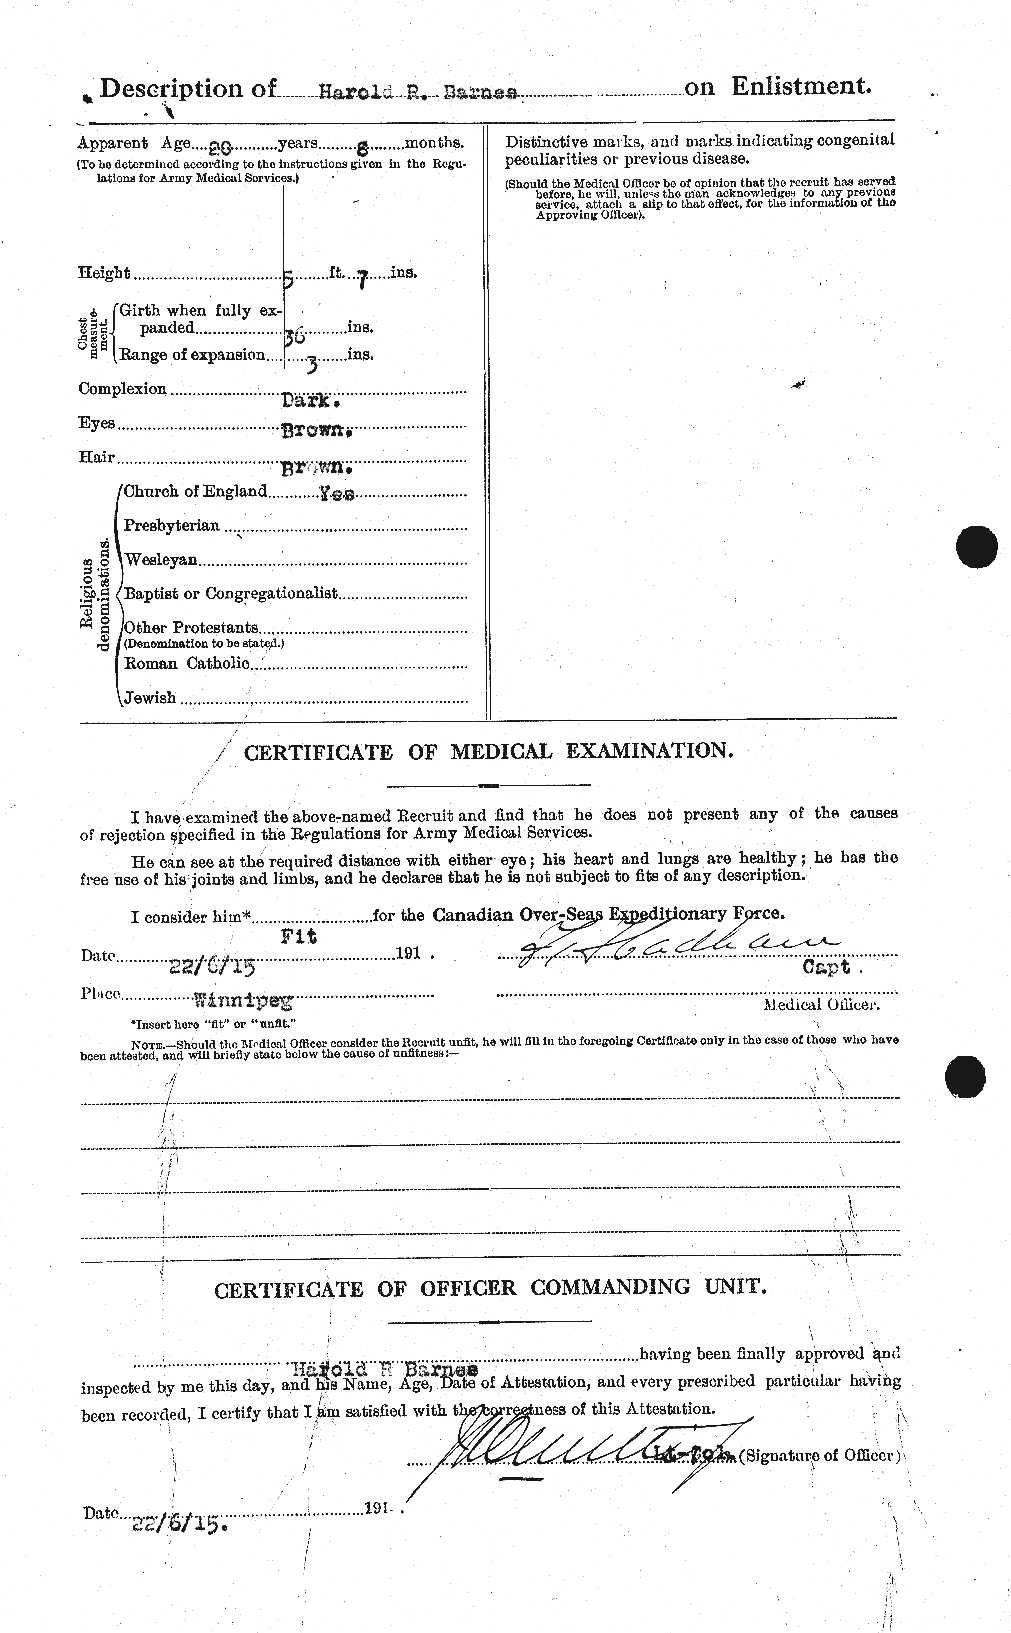 Personnel Records of the First World War - CEF 222489b